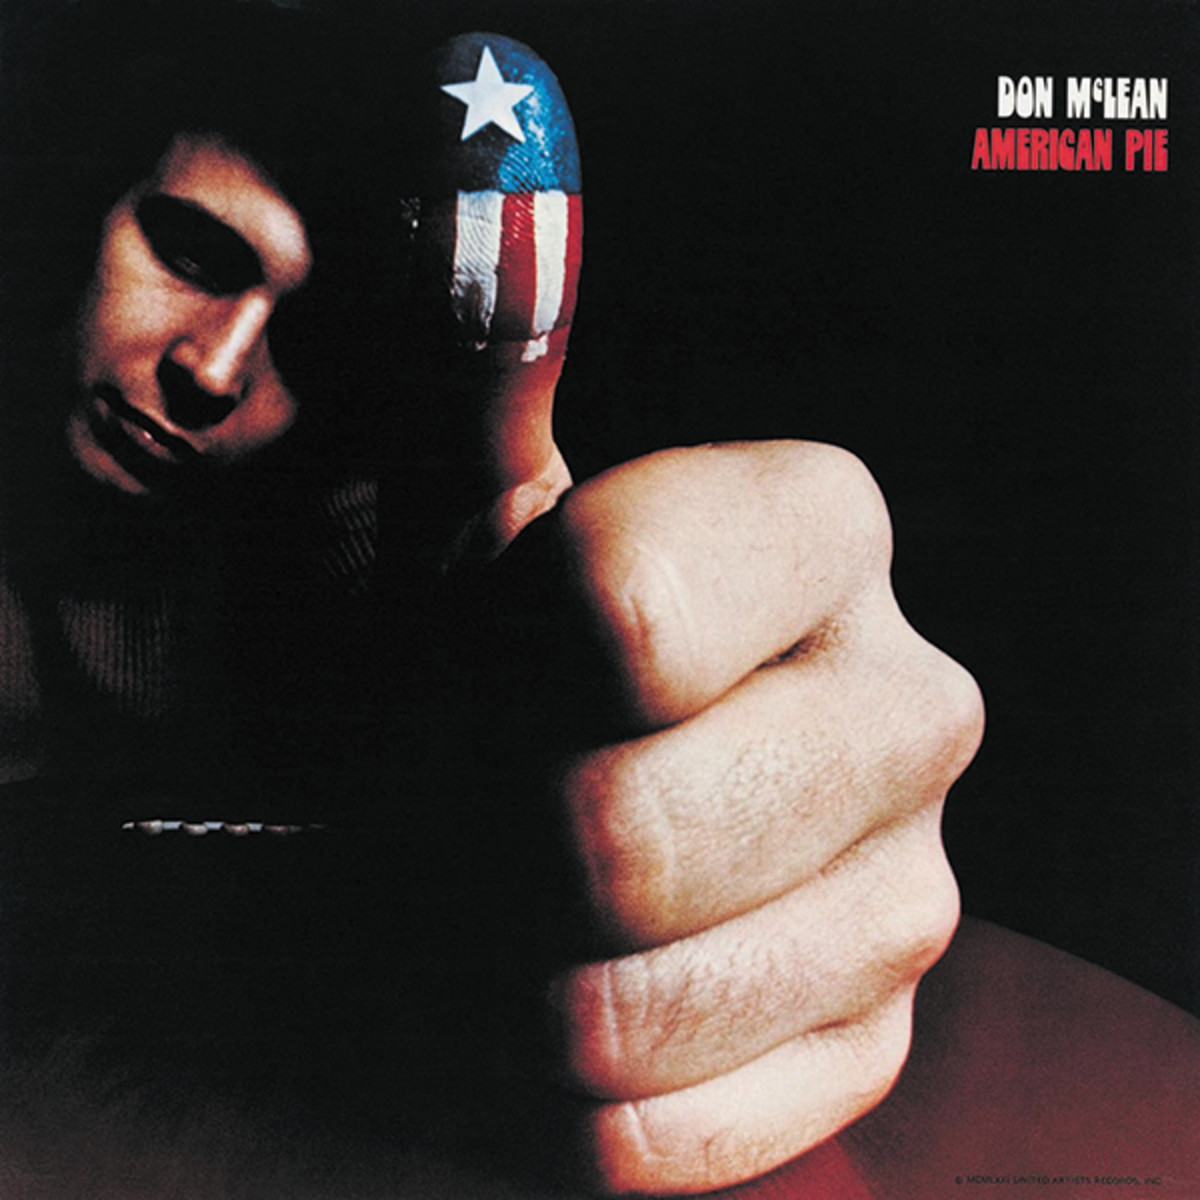 Get the song "American Pie" from the album of the same name (Click on image). 